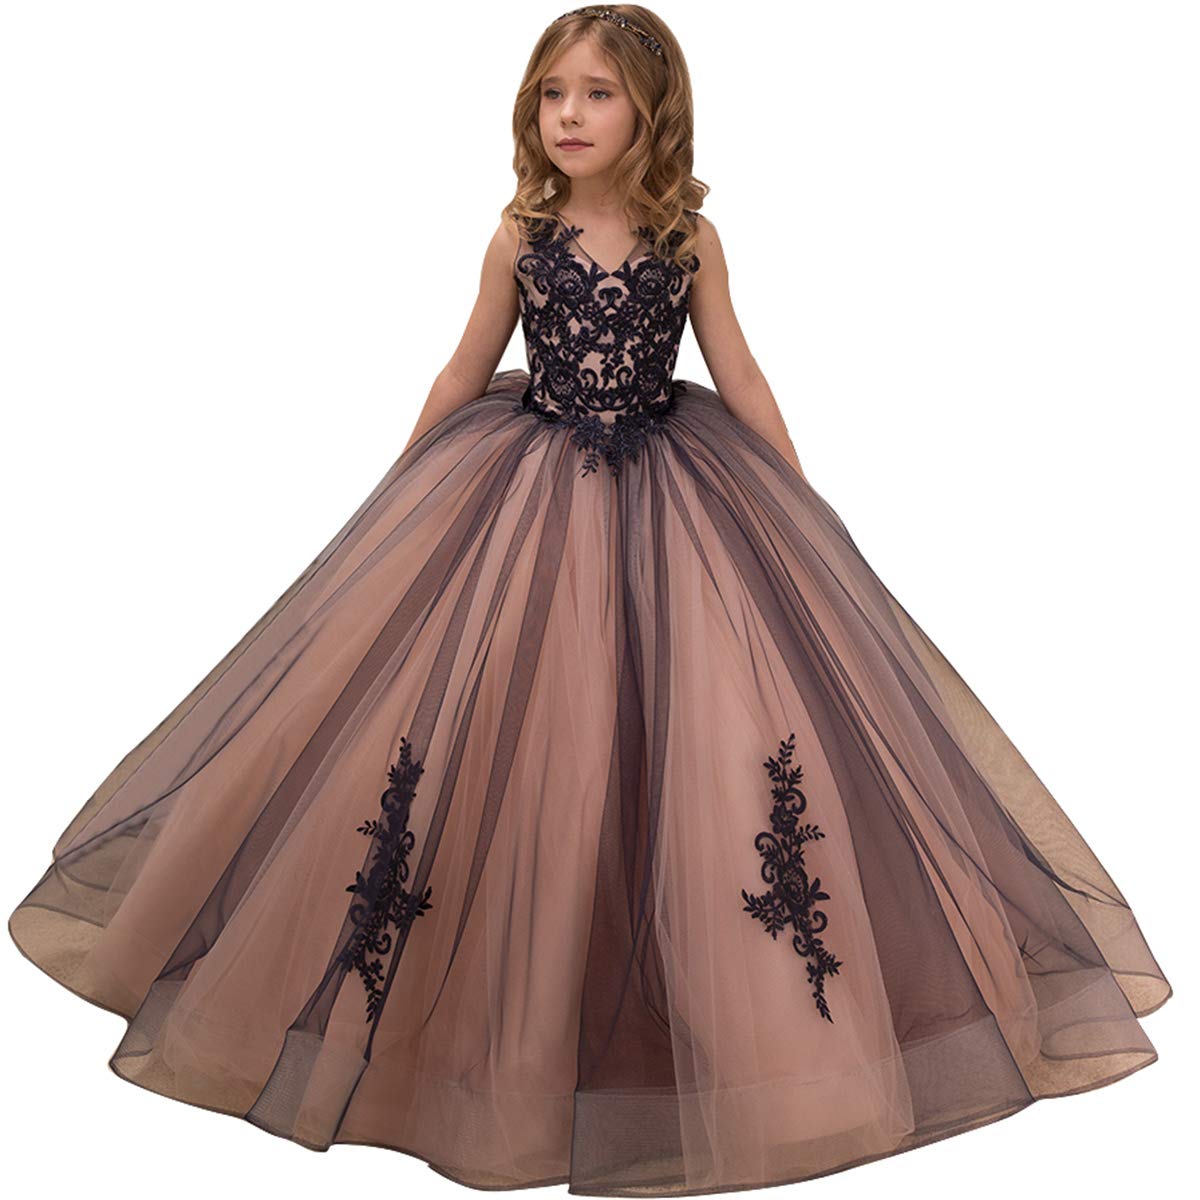 Communion Ball Gowns Long Sleeves Lace Champagne Vintage Princess Dres –  Avadress